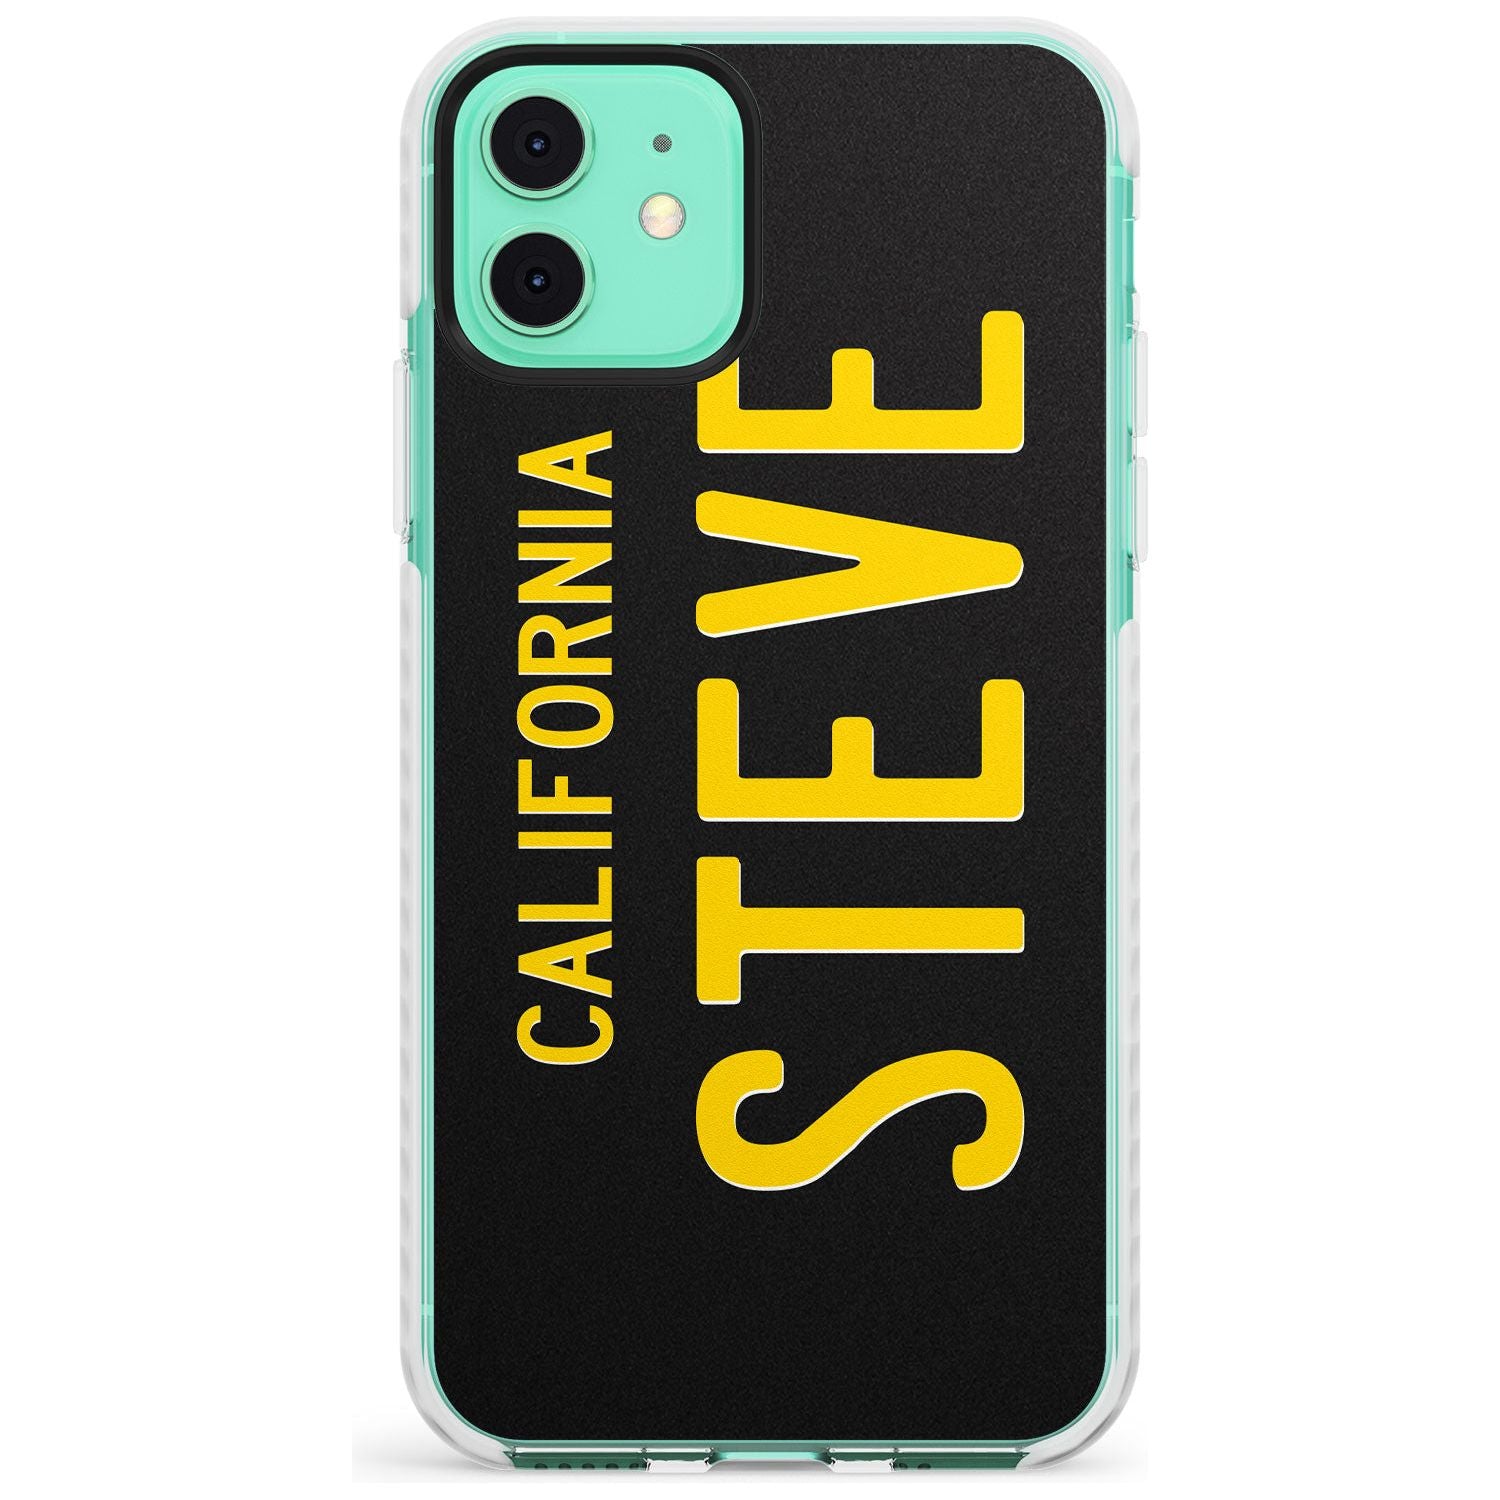 Vintage California License Plate Slim TPU Phone Case for iPhone 11